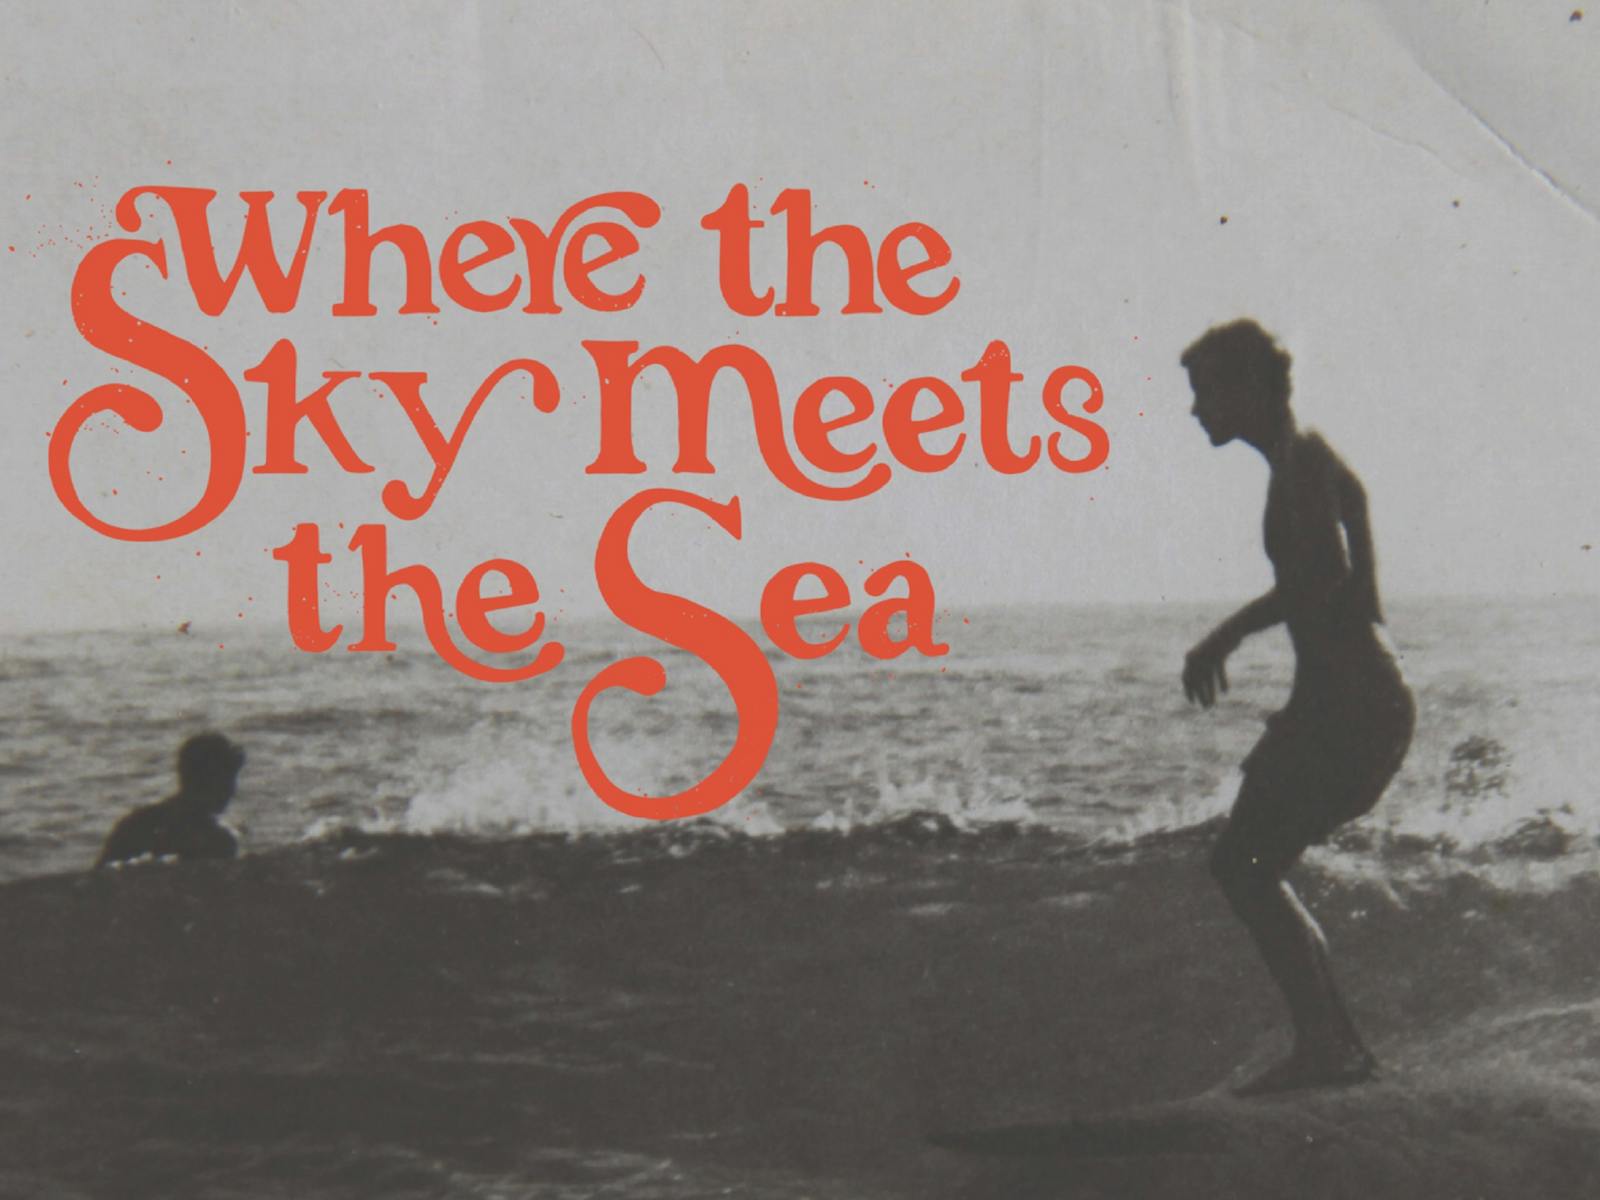 Image for Where the sky meets the sea